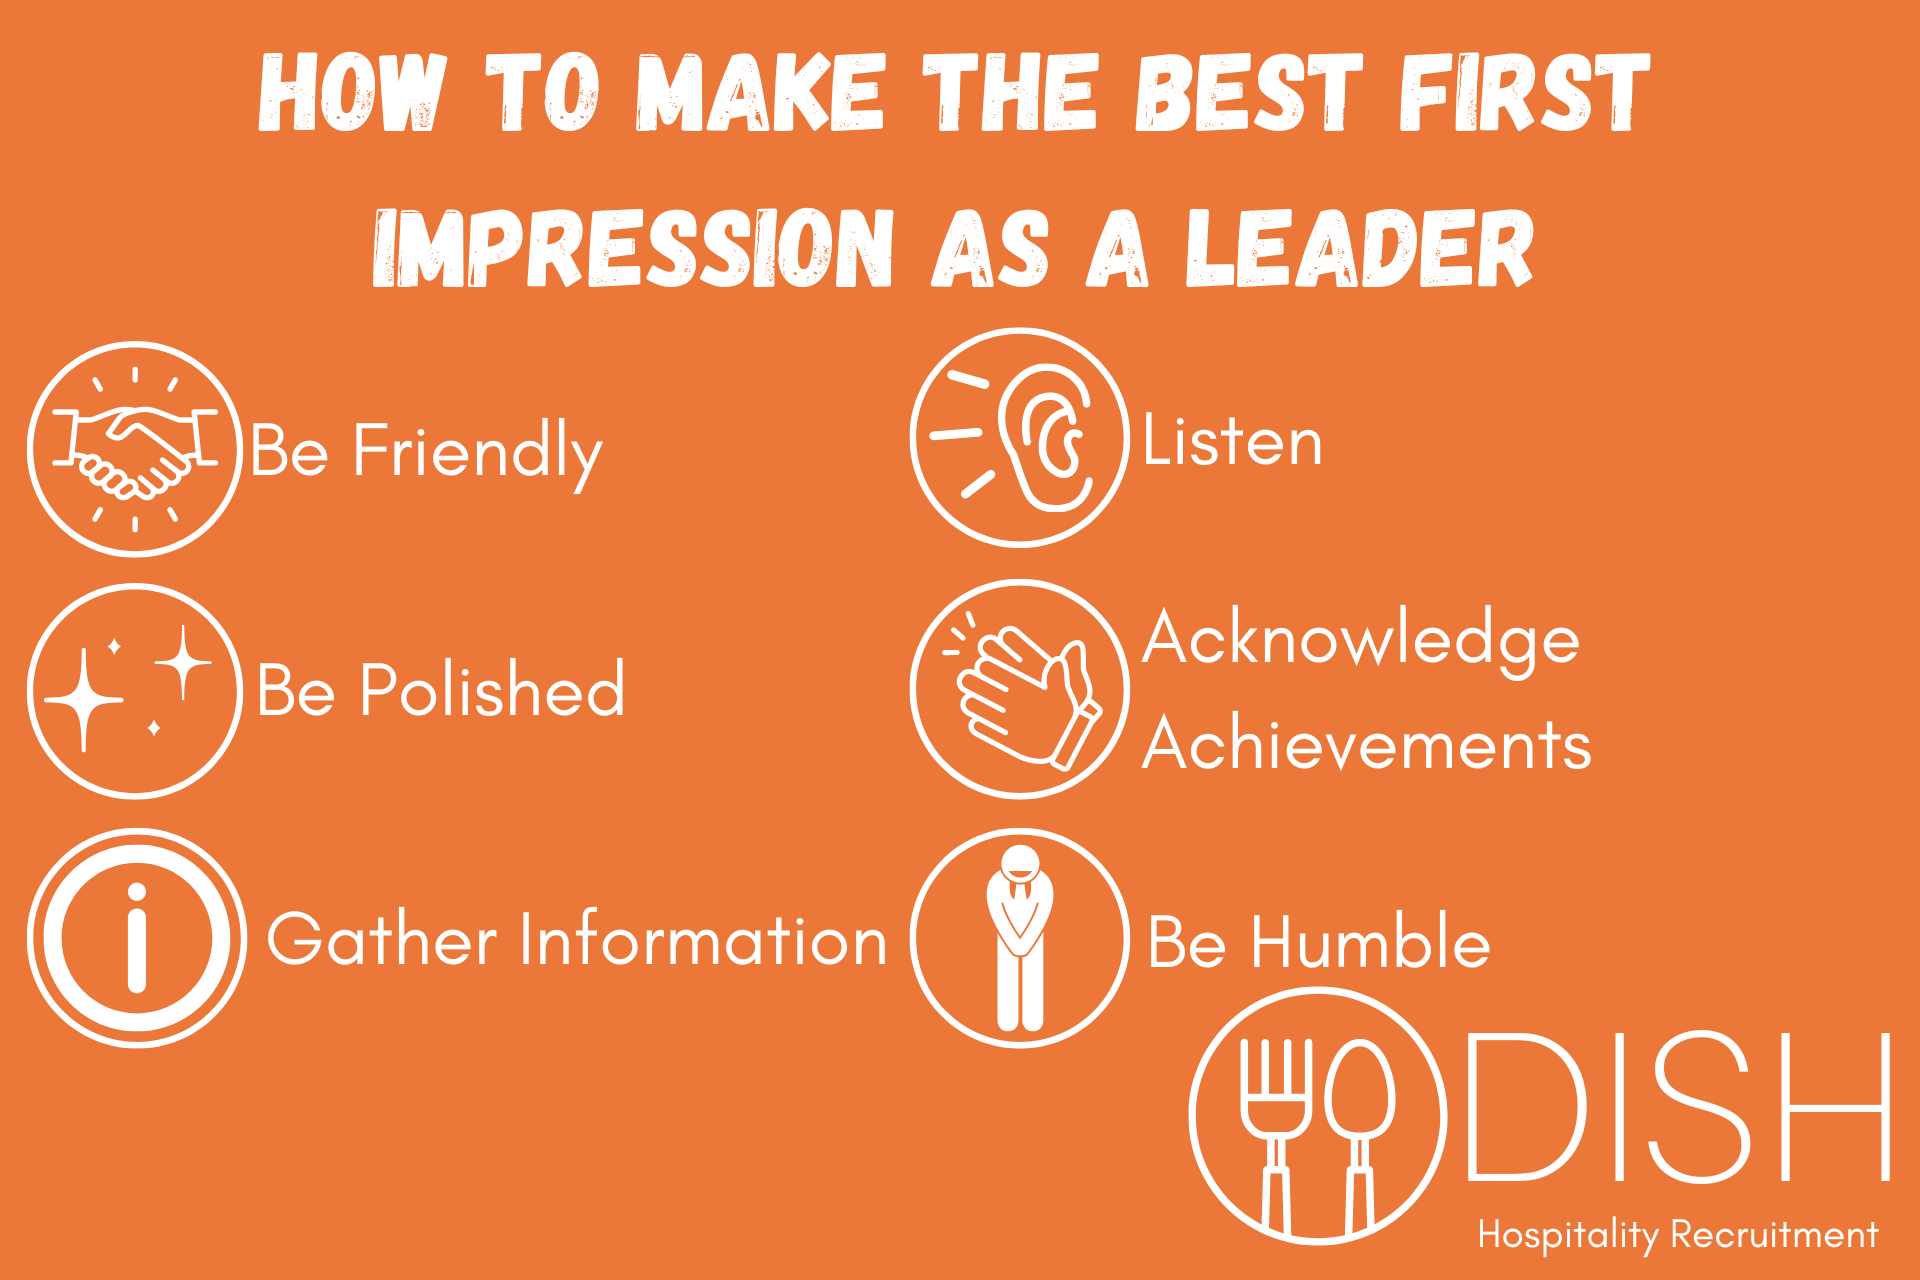 How to Make the Best First Impression as a Leader